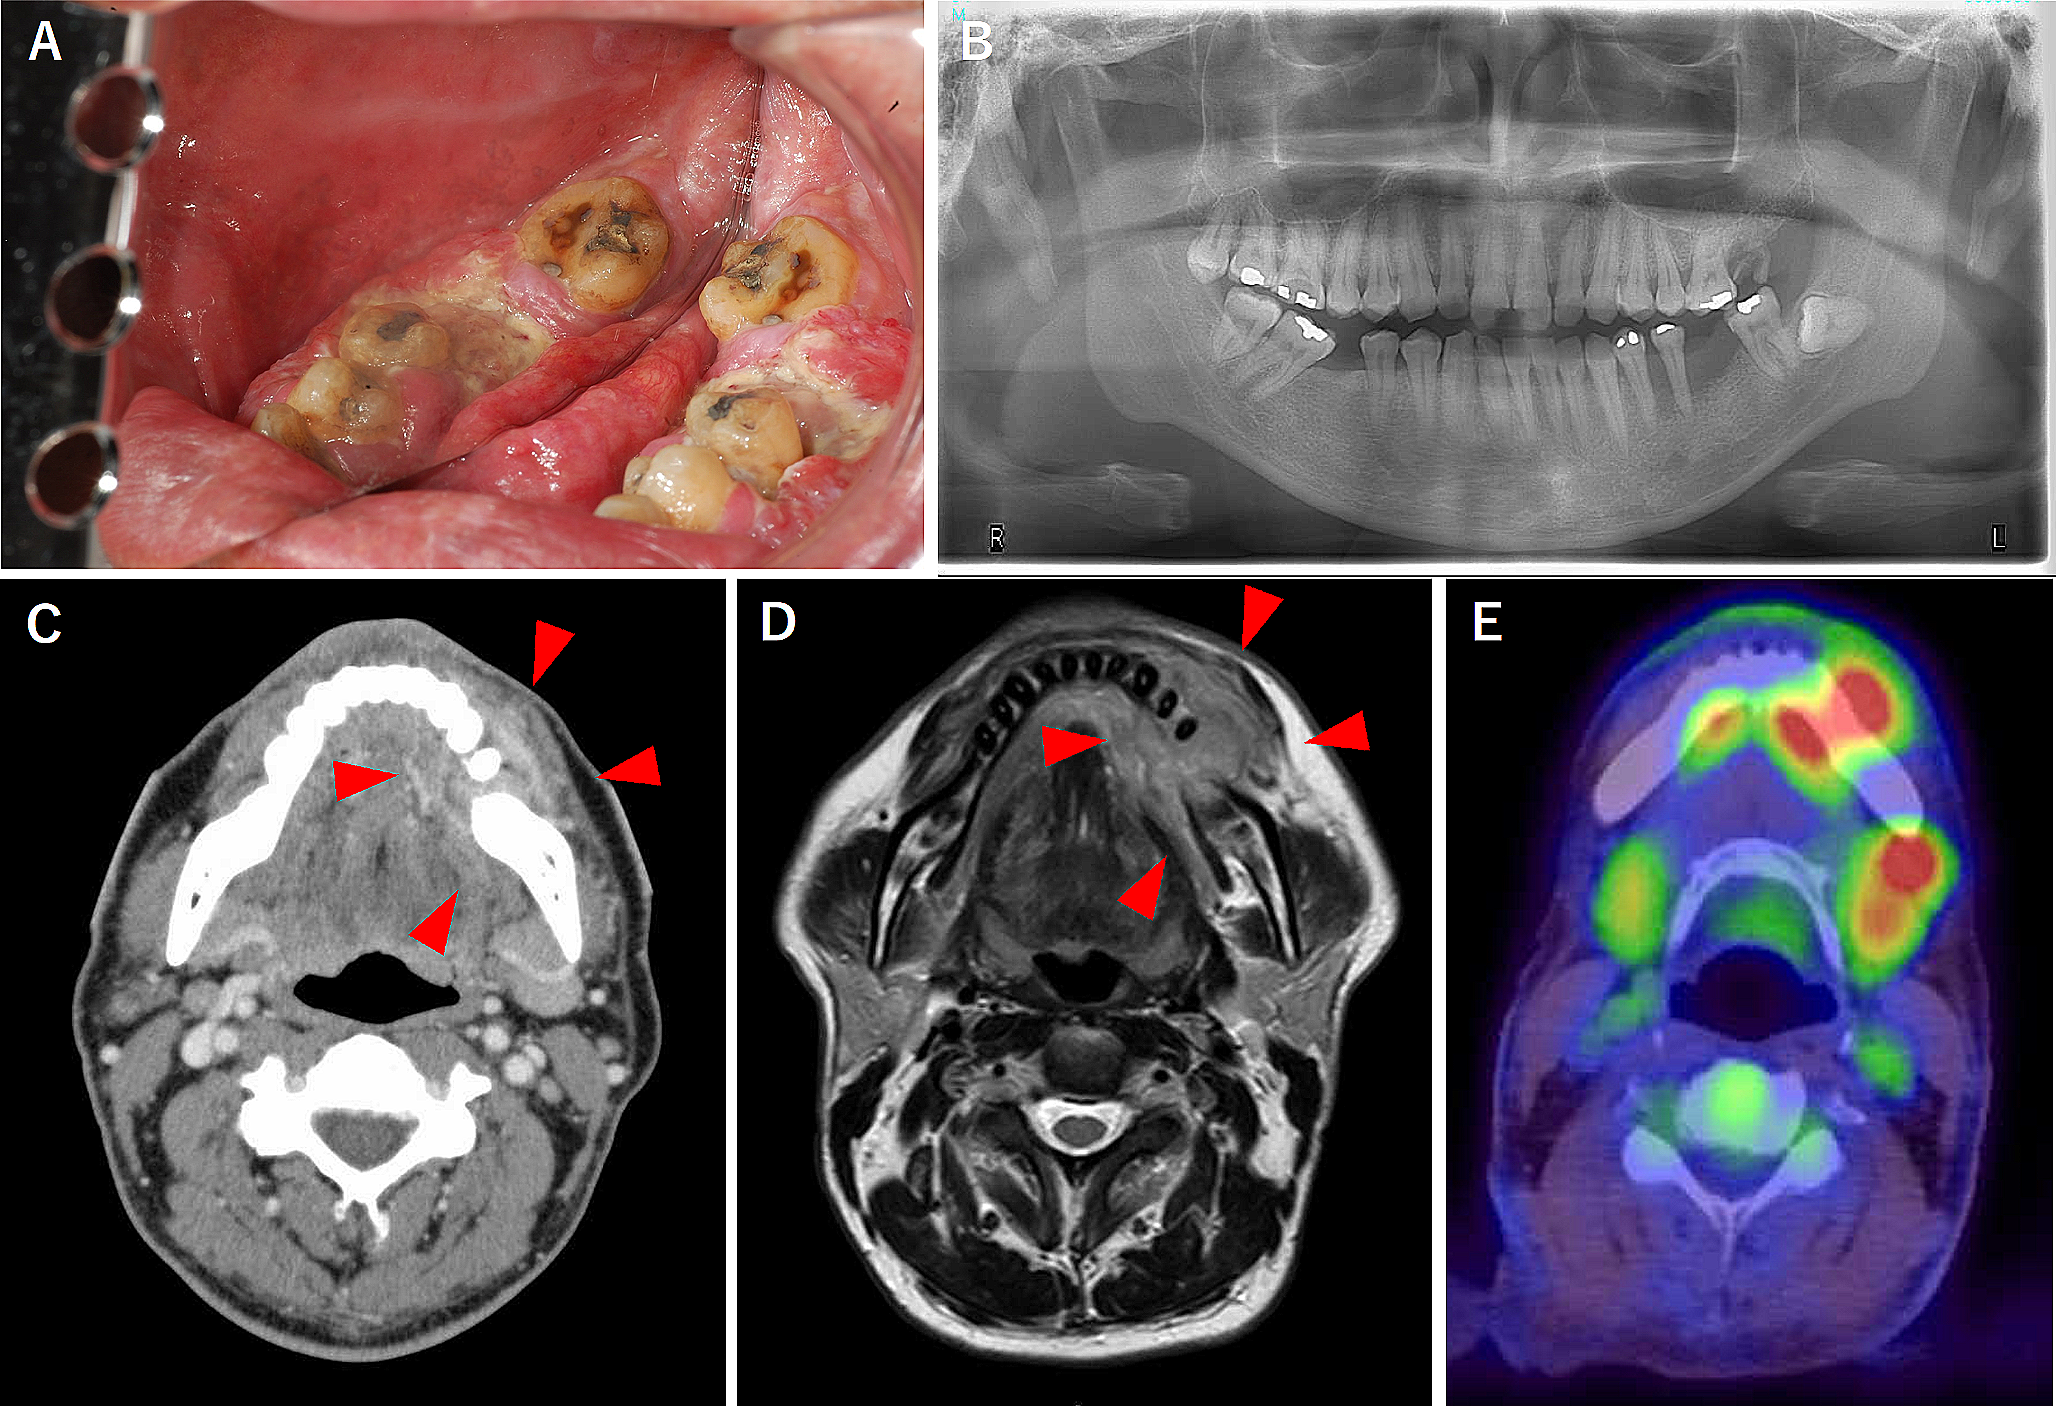 Squamous cell carcinoma of mandibular gingiva producing both parathyroid hormone-related protein and granulocyte colony-stimulating factor: a case report